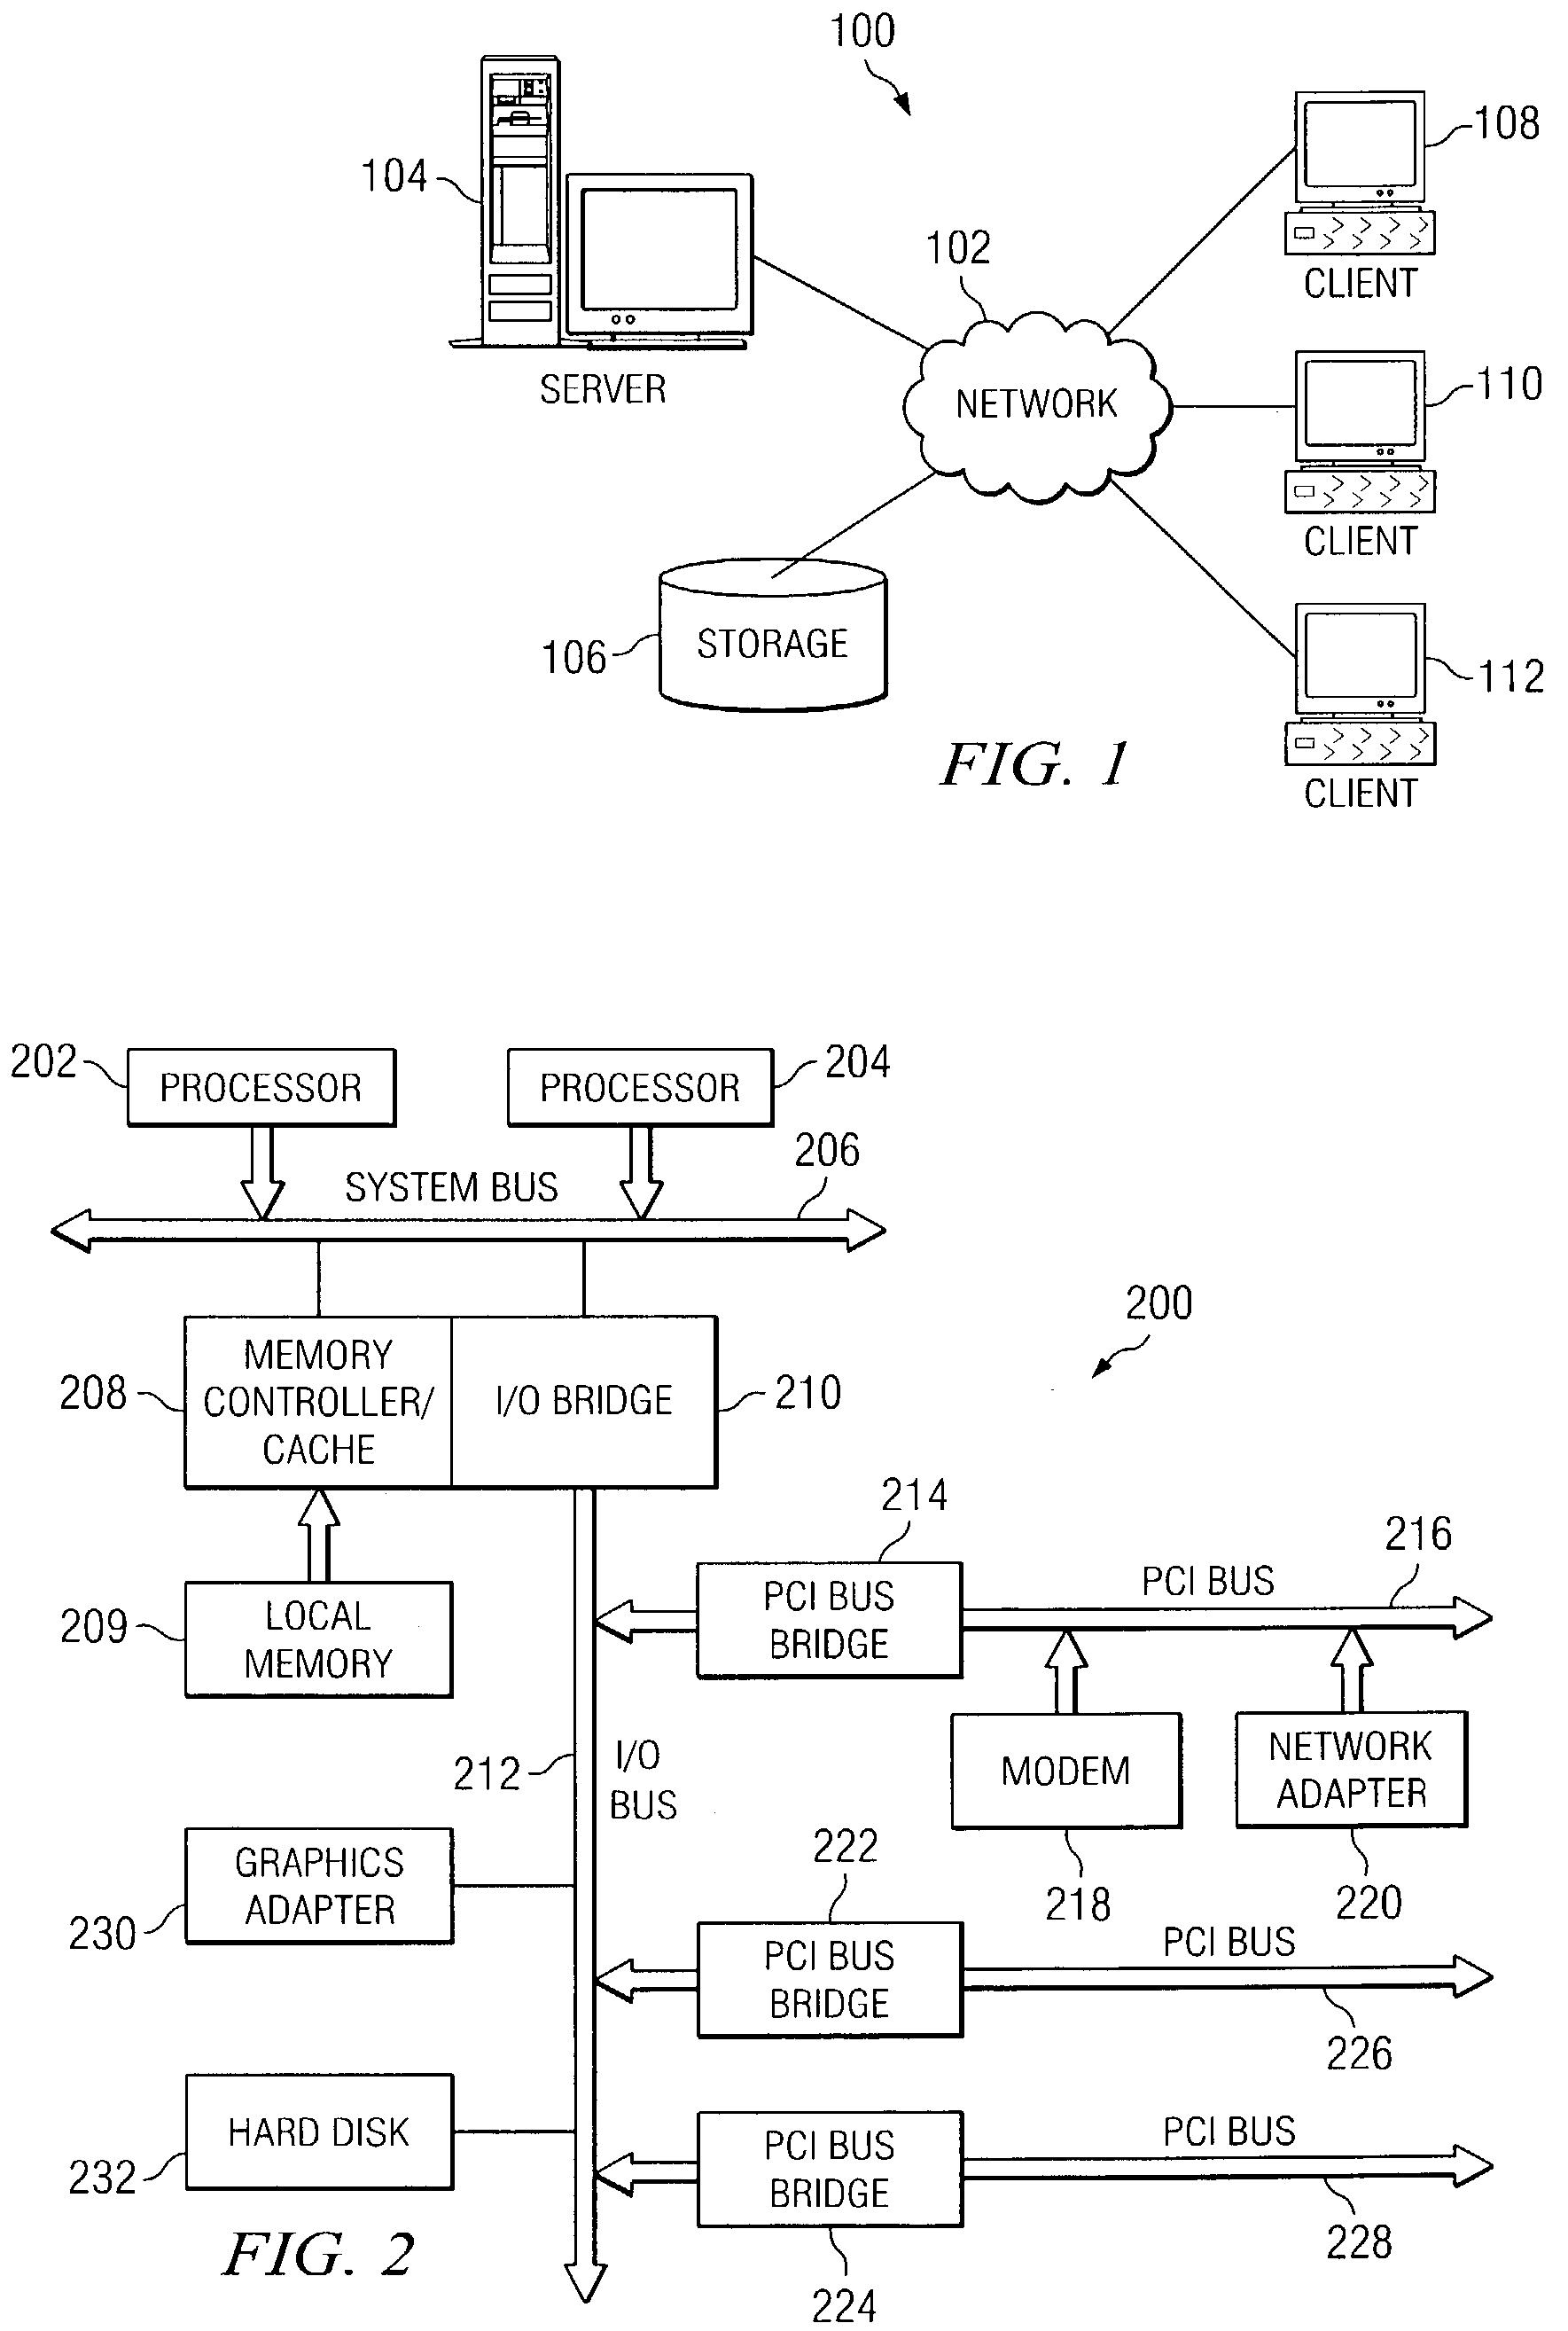 System and method for generating high-function browser widgets with full addressability